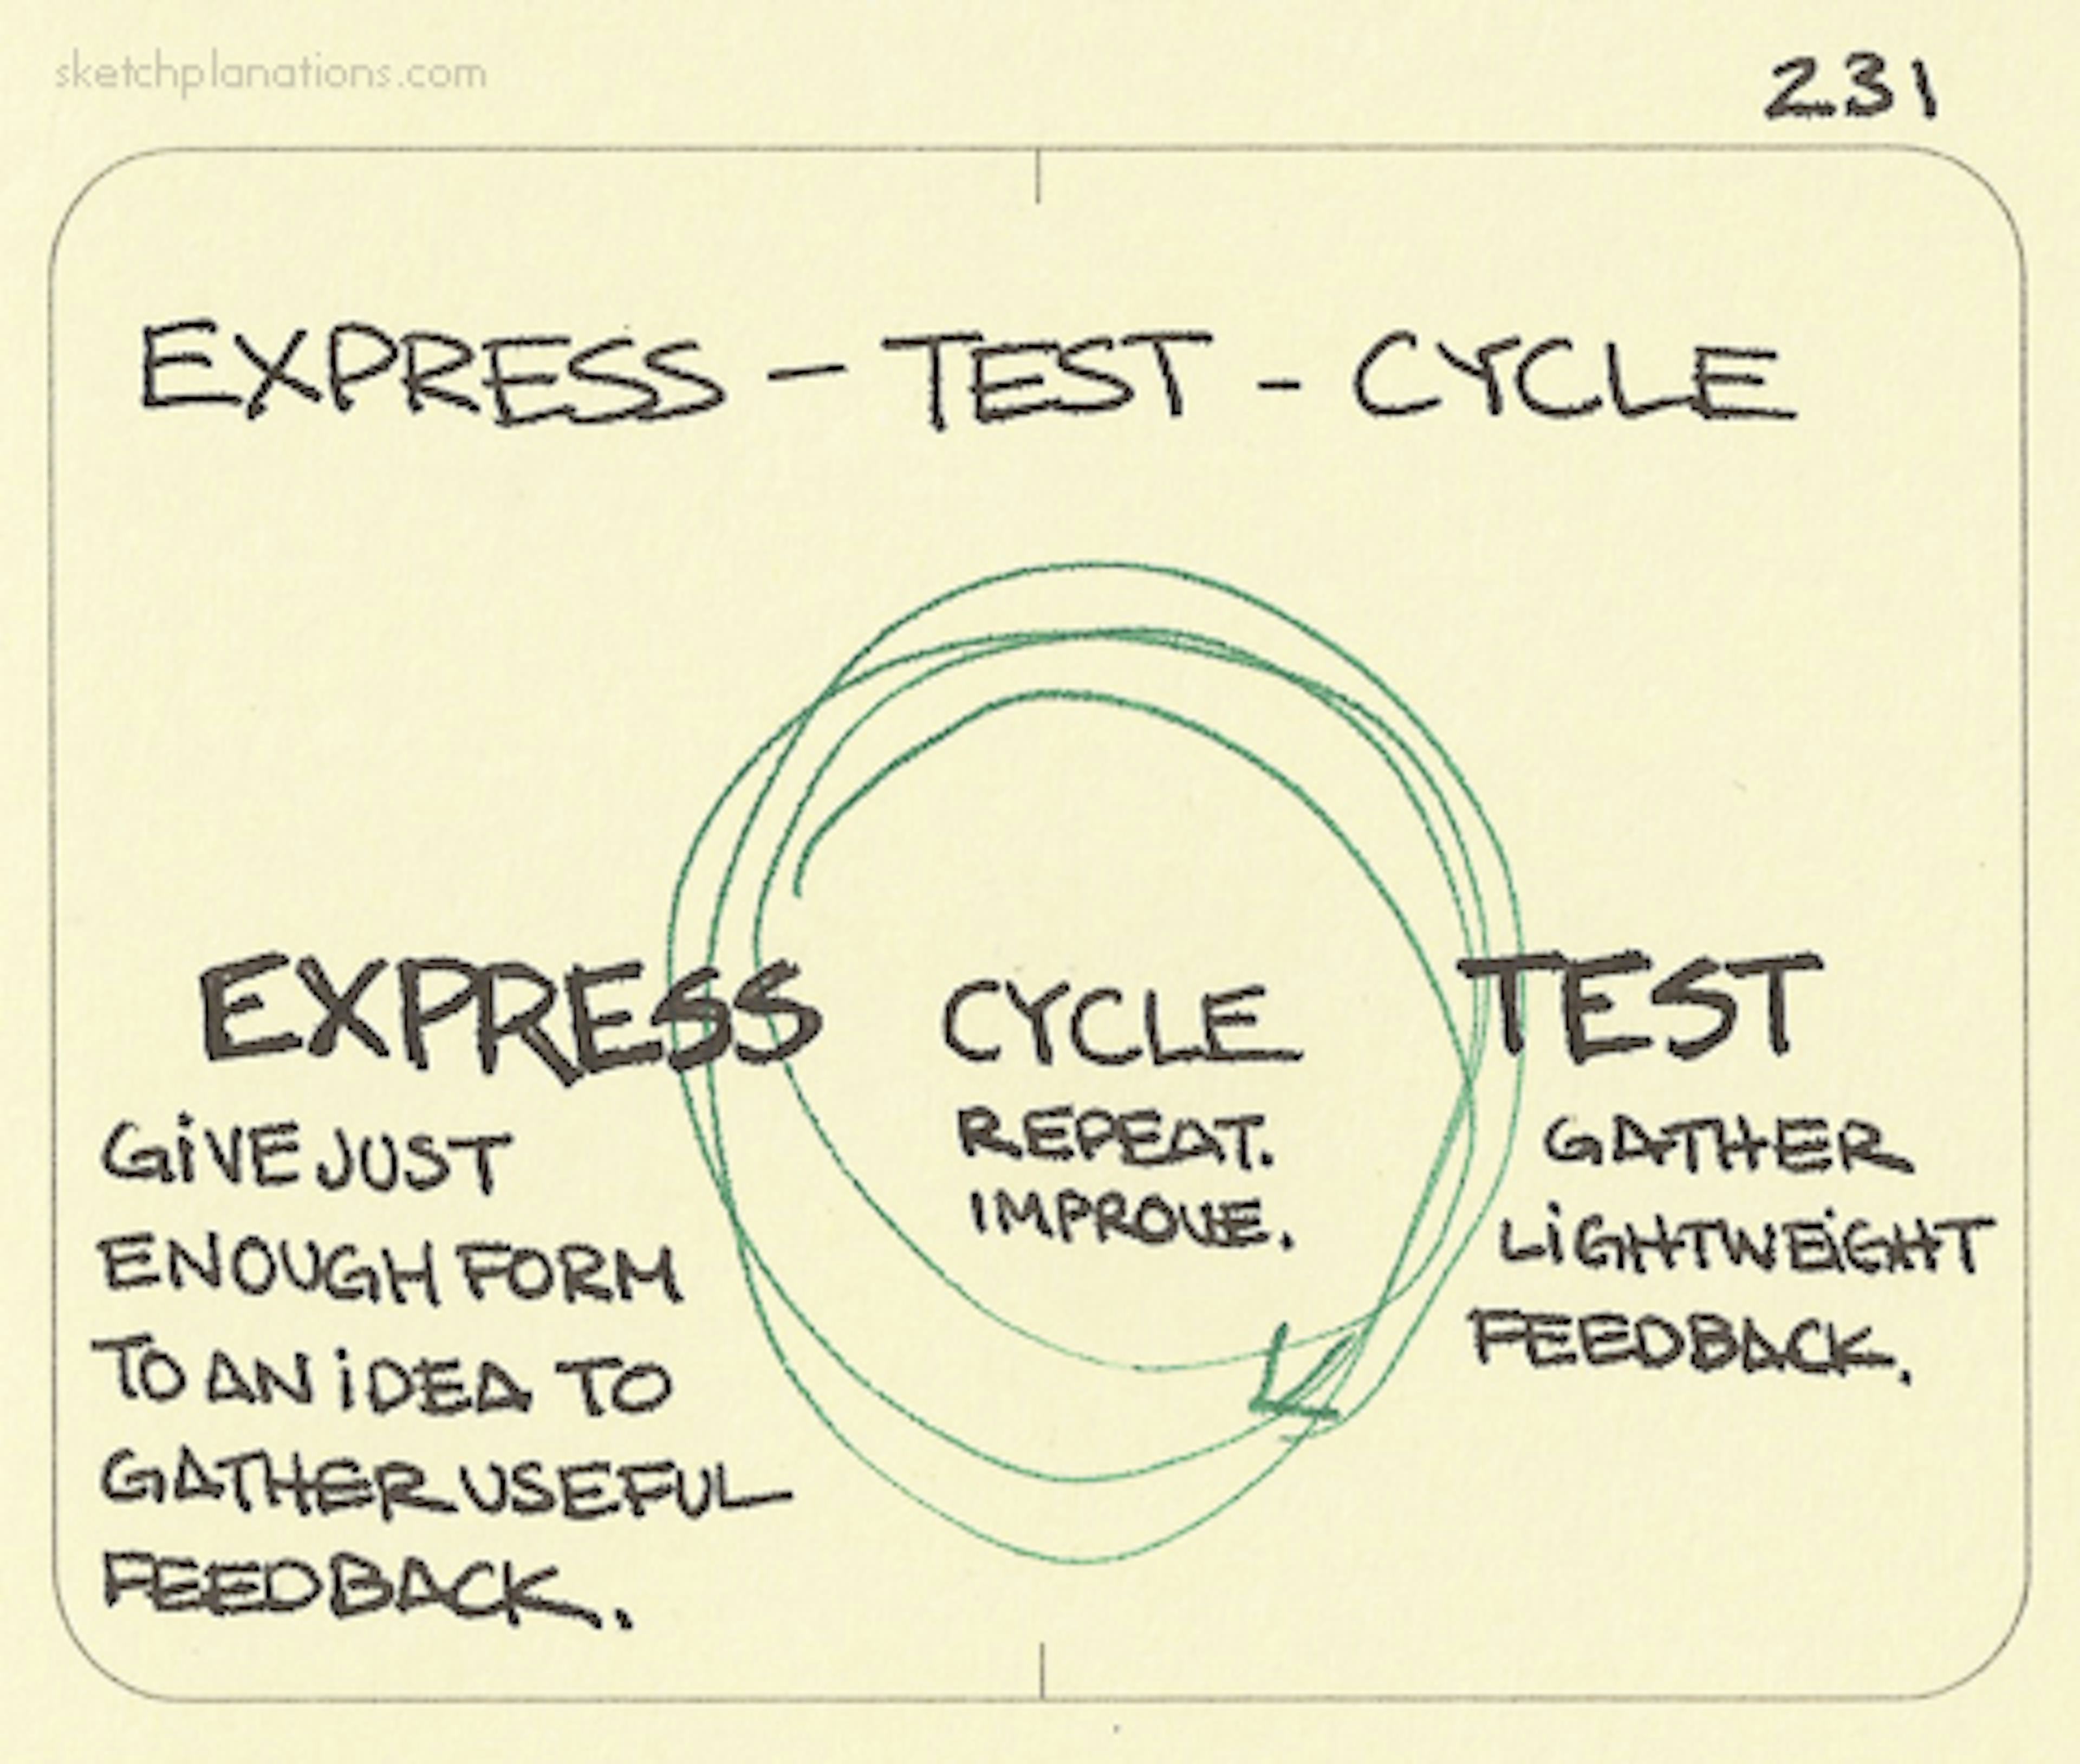 Express - Test - Cycle - Sketchplanations